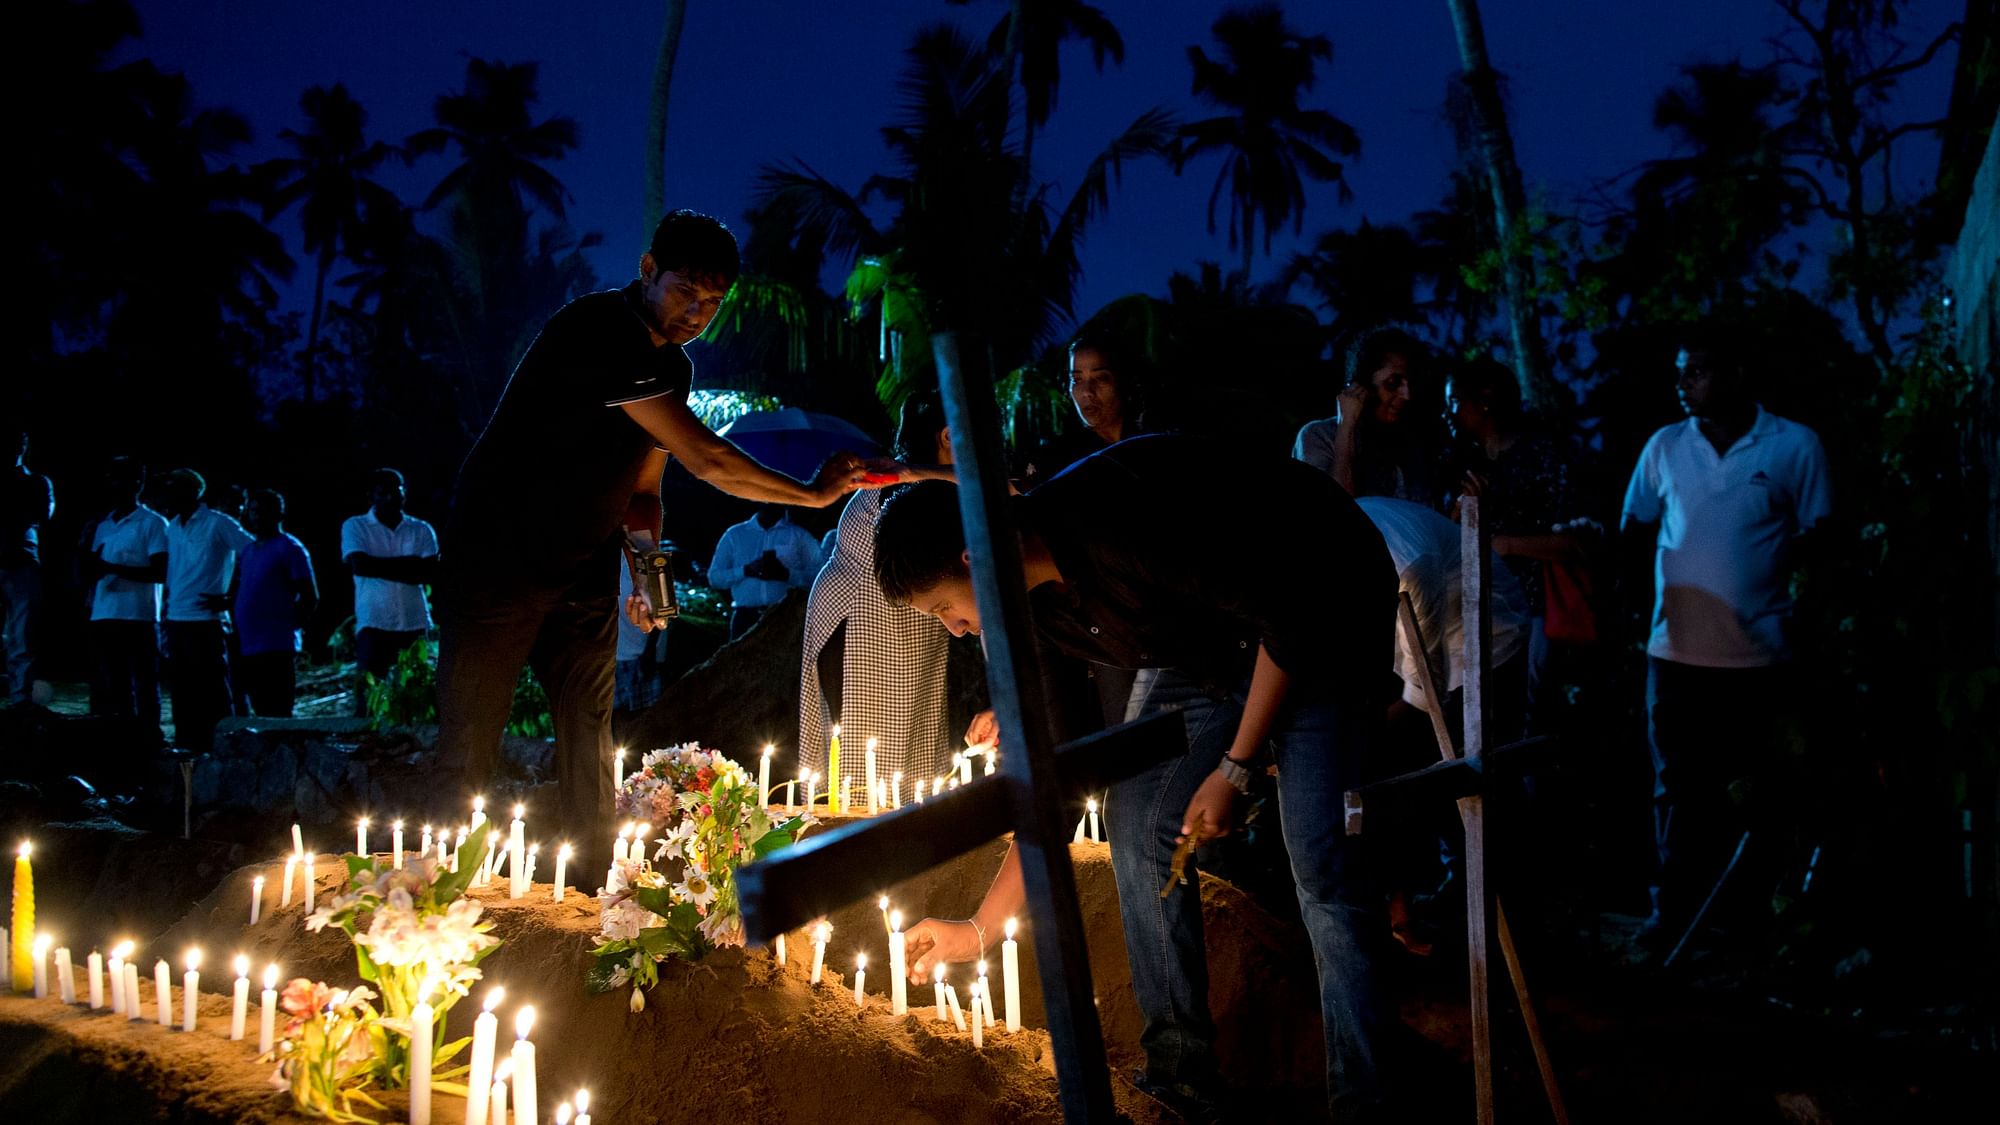 Relatives light candles after the burial of three victims of the same family, who died at Easter Sunday bomb blast at St Sebastian Church in Negombo, Sri Lanka.